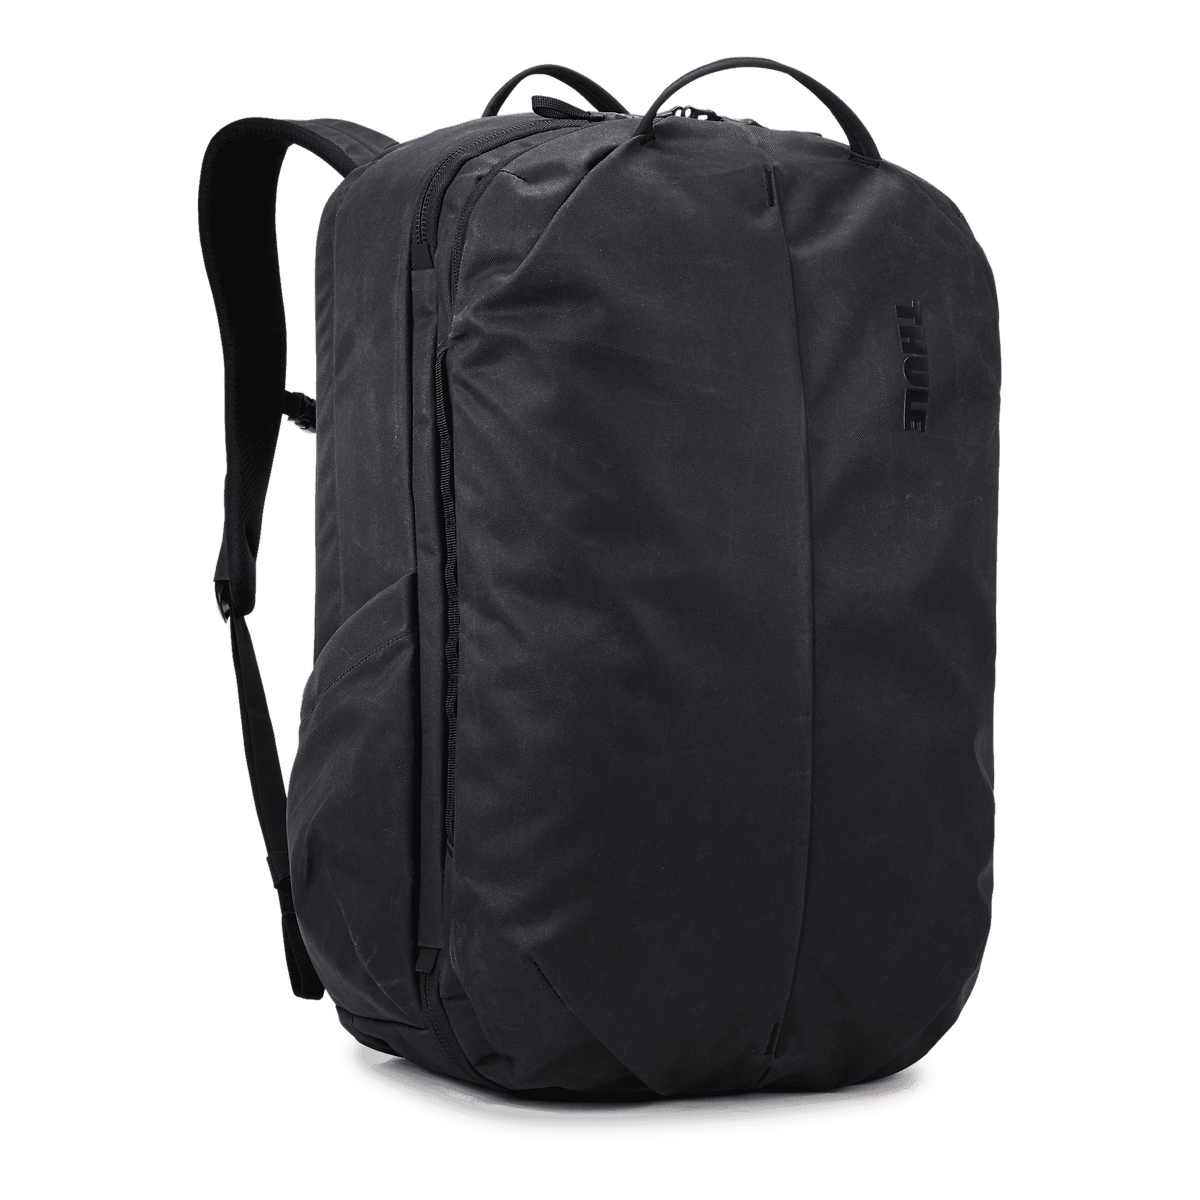 Thule Aion travel backpack 40L